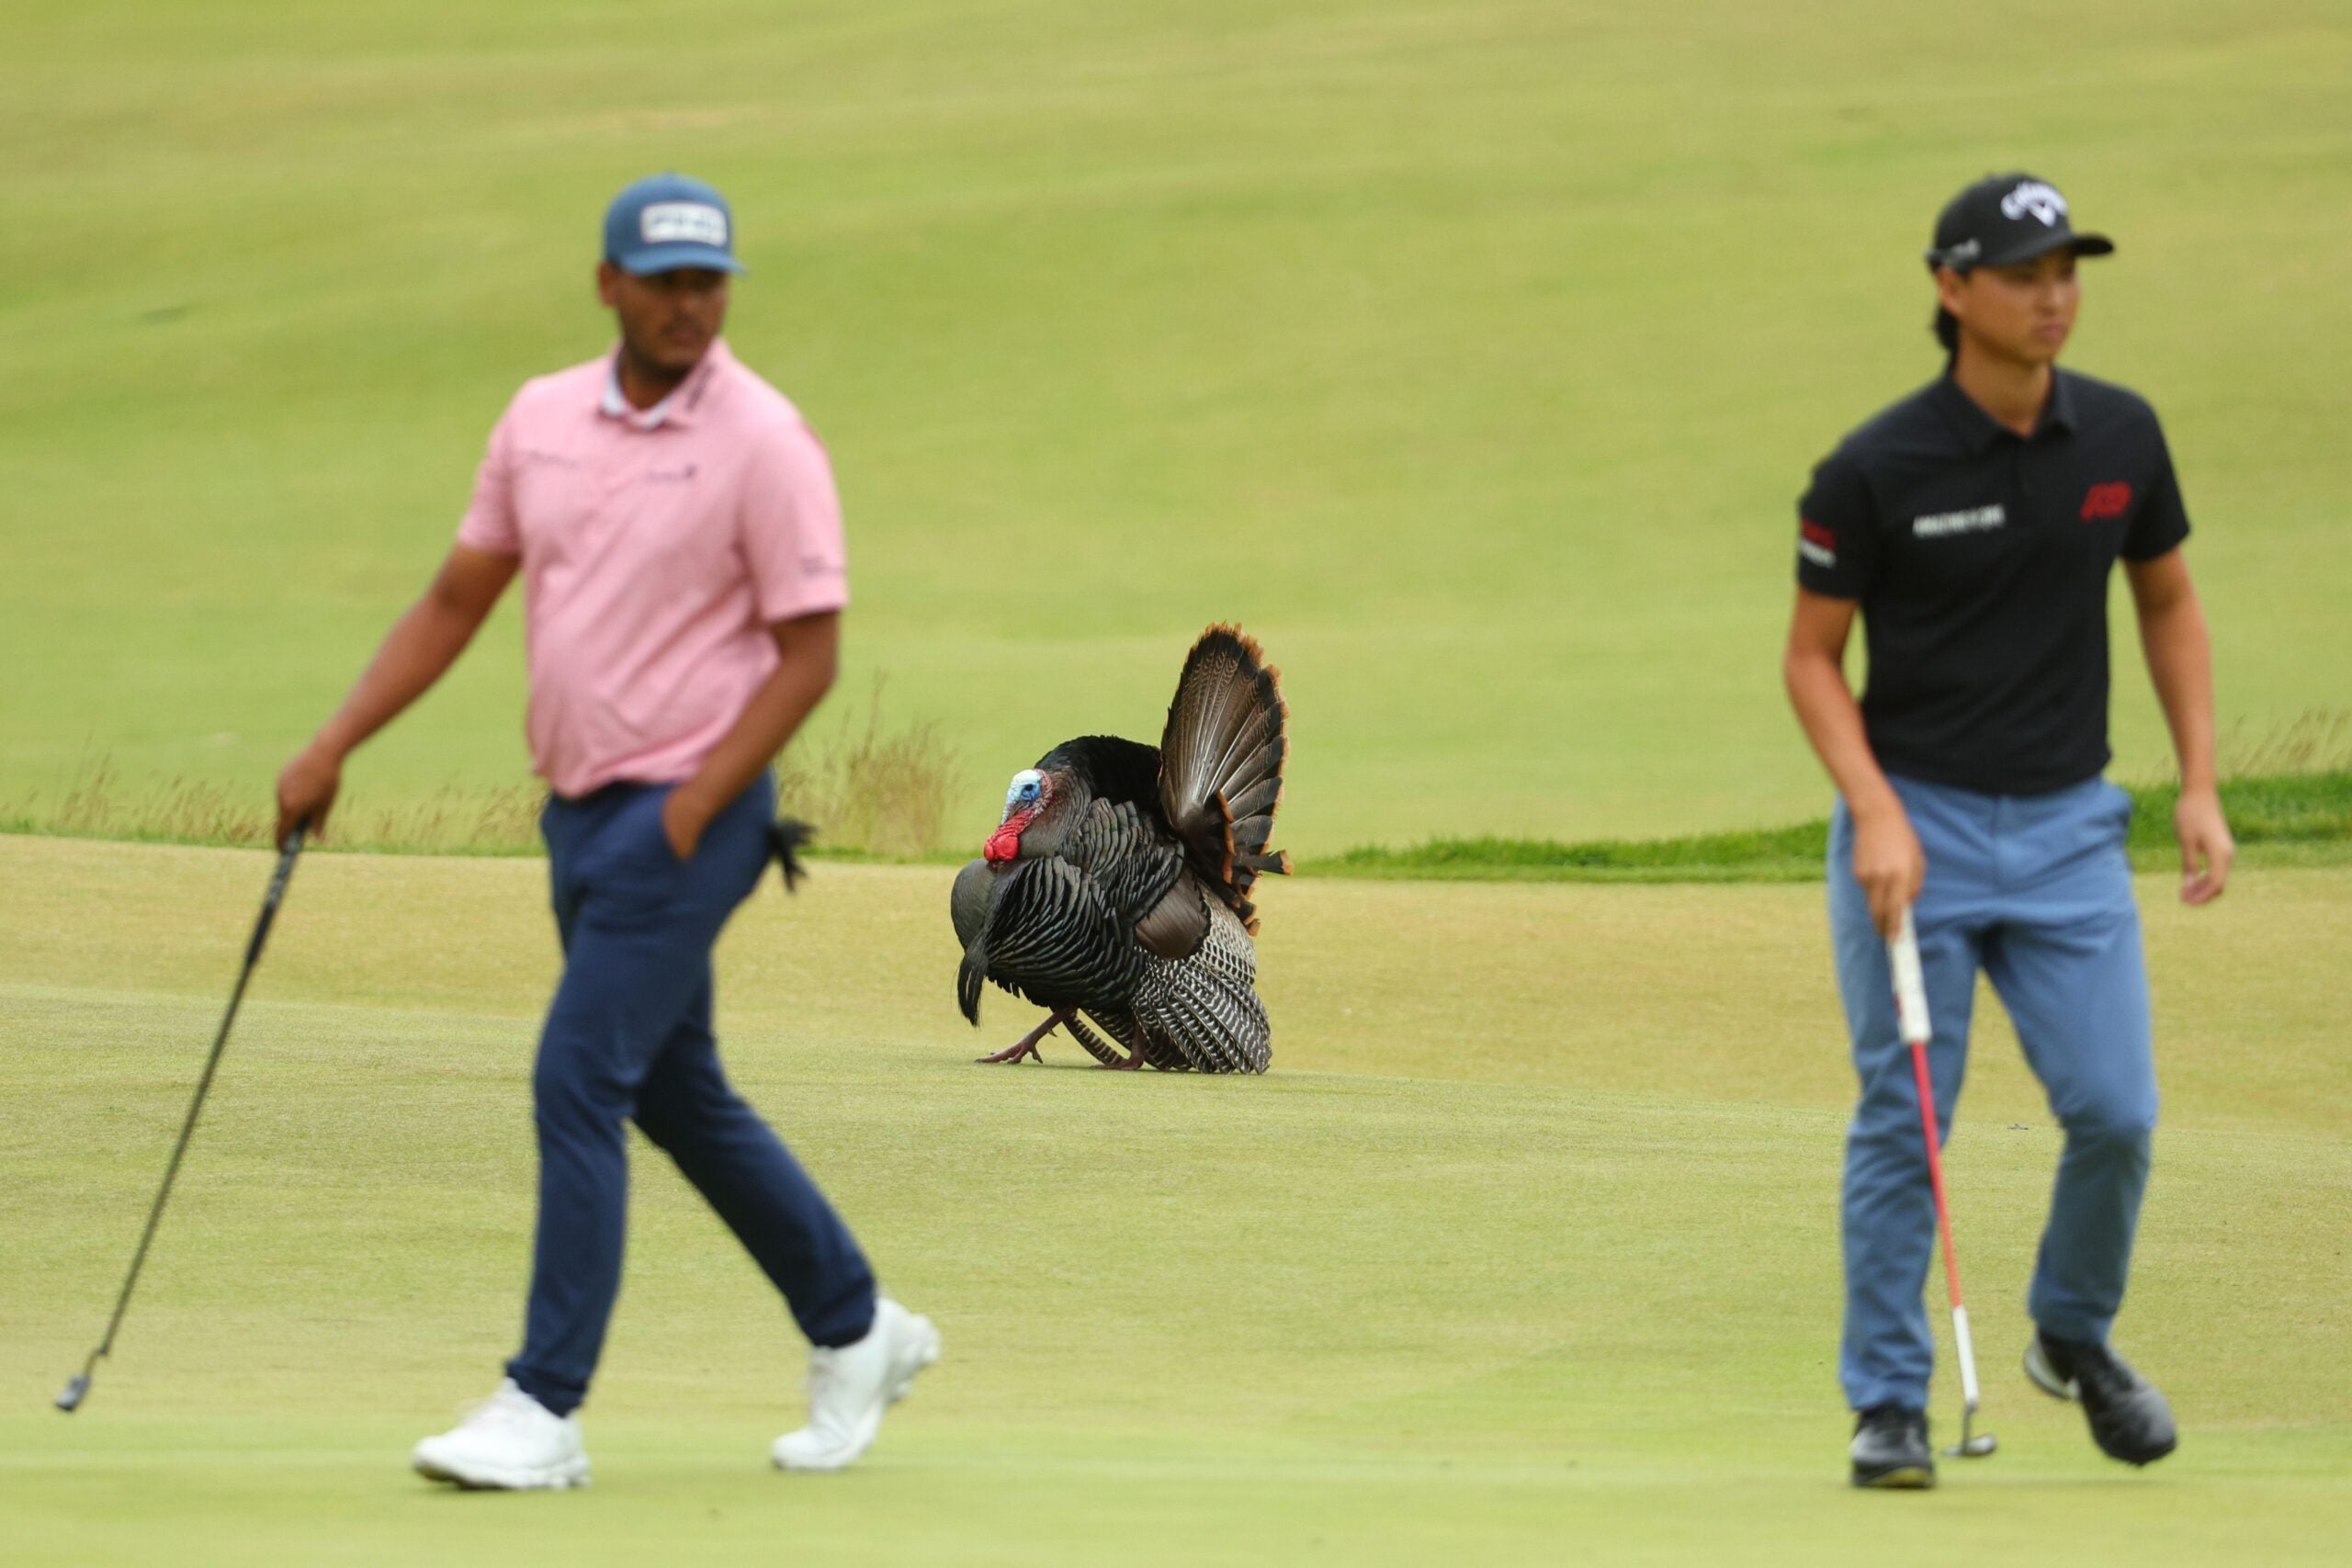 Watch Turkey makes its way onto course at US Open in Brookline